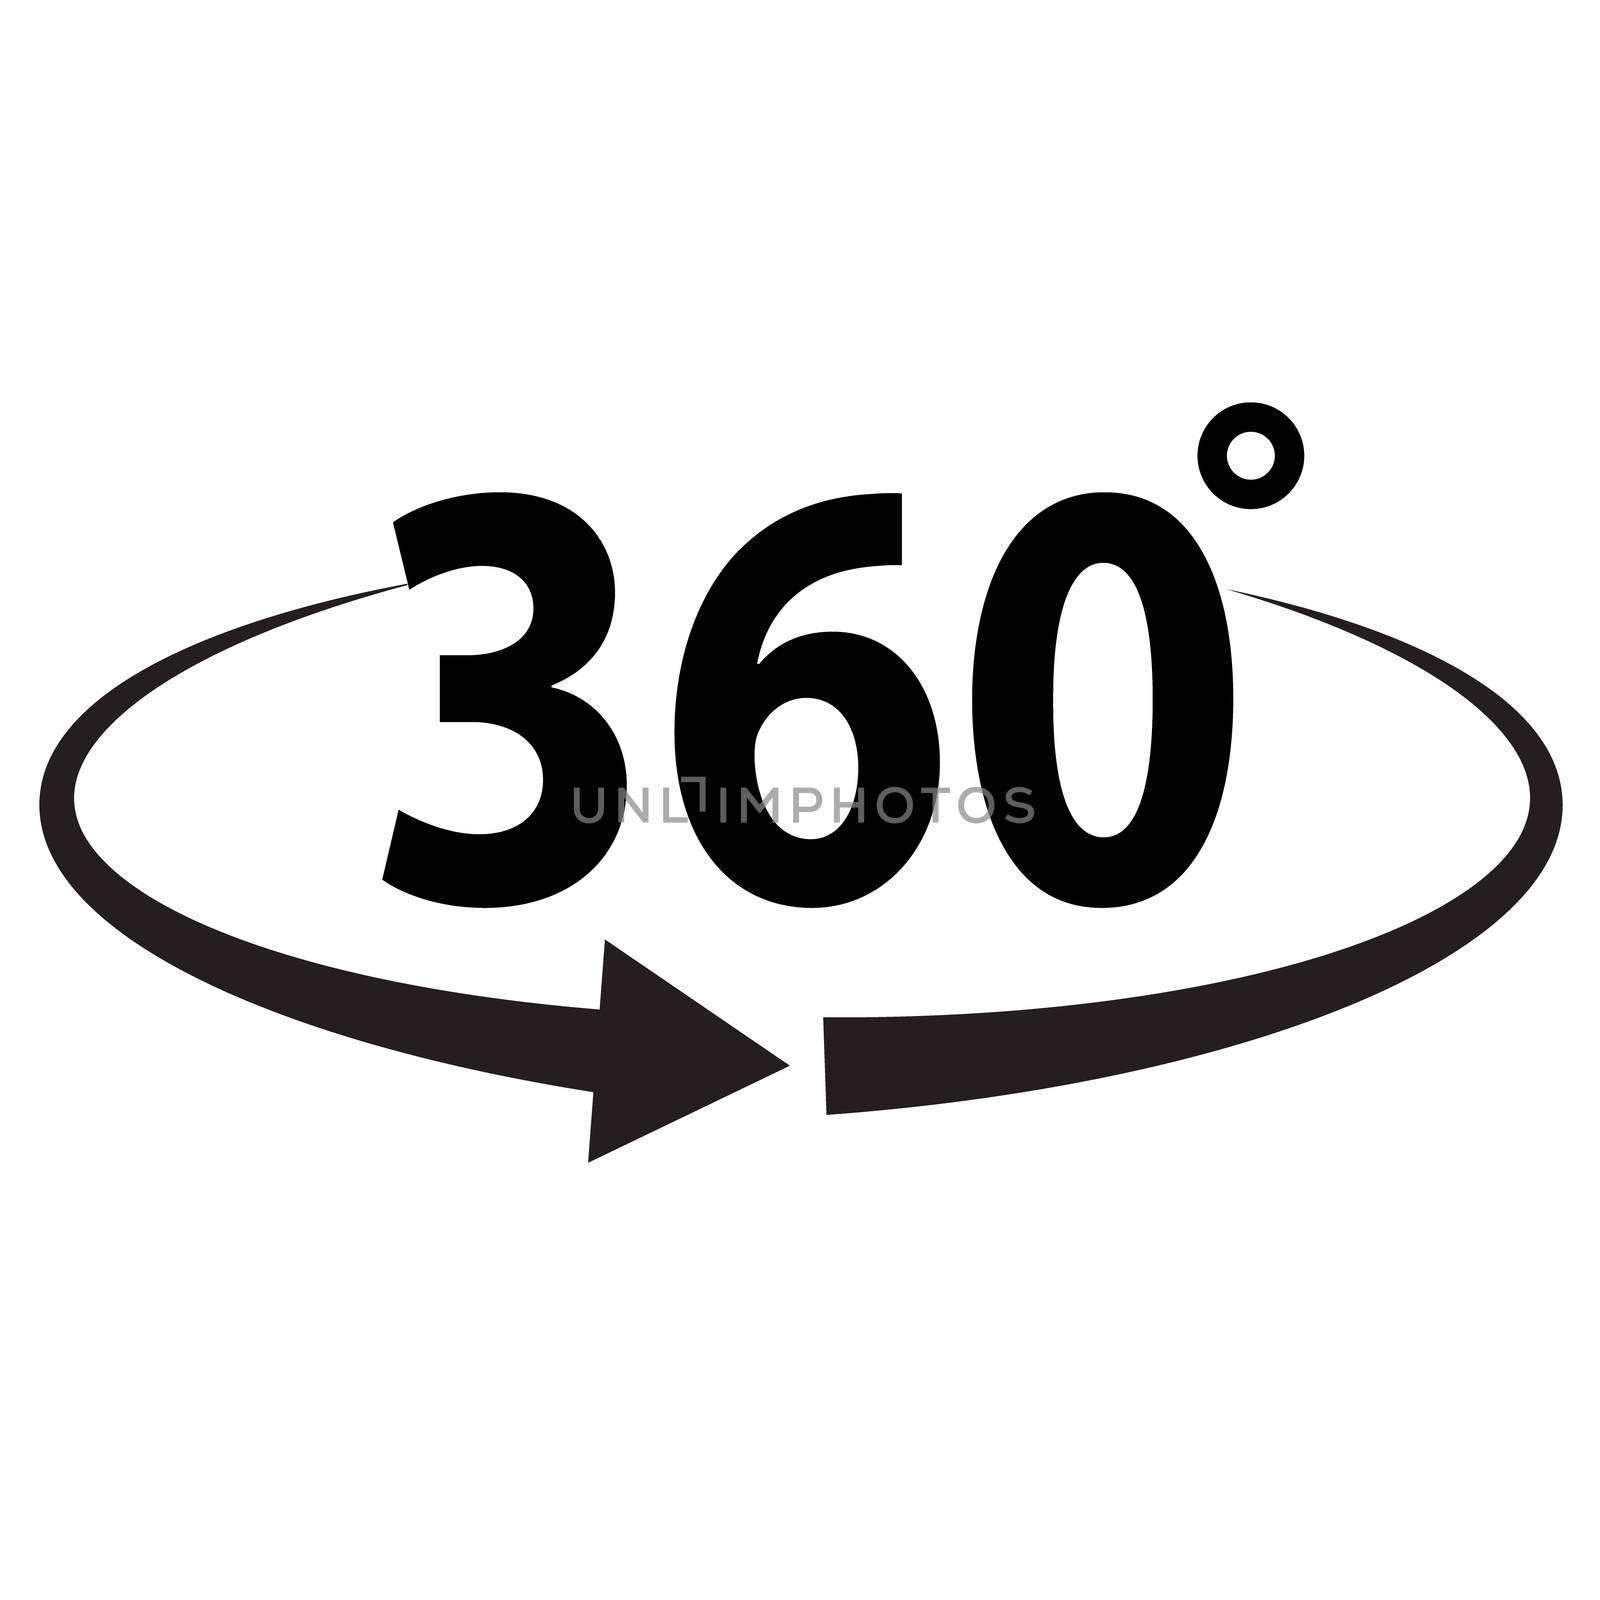 Angle 360 degrees icon on white background. flat style. Angle 360 degrees icon for your web site design, logo, app, UI. 360 sign. 